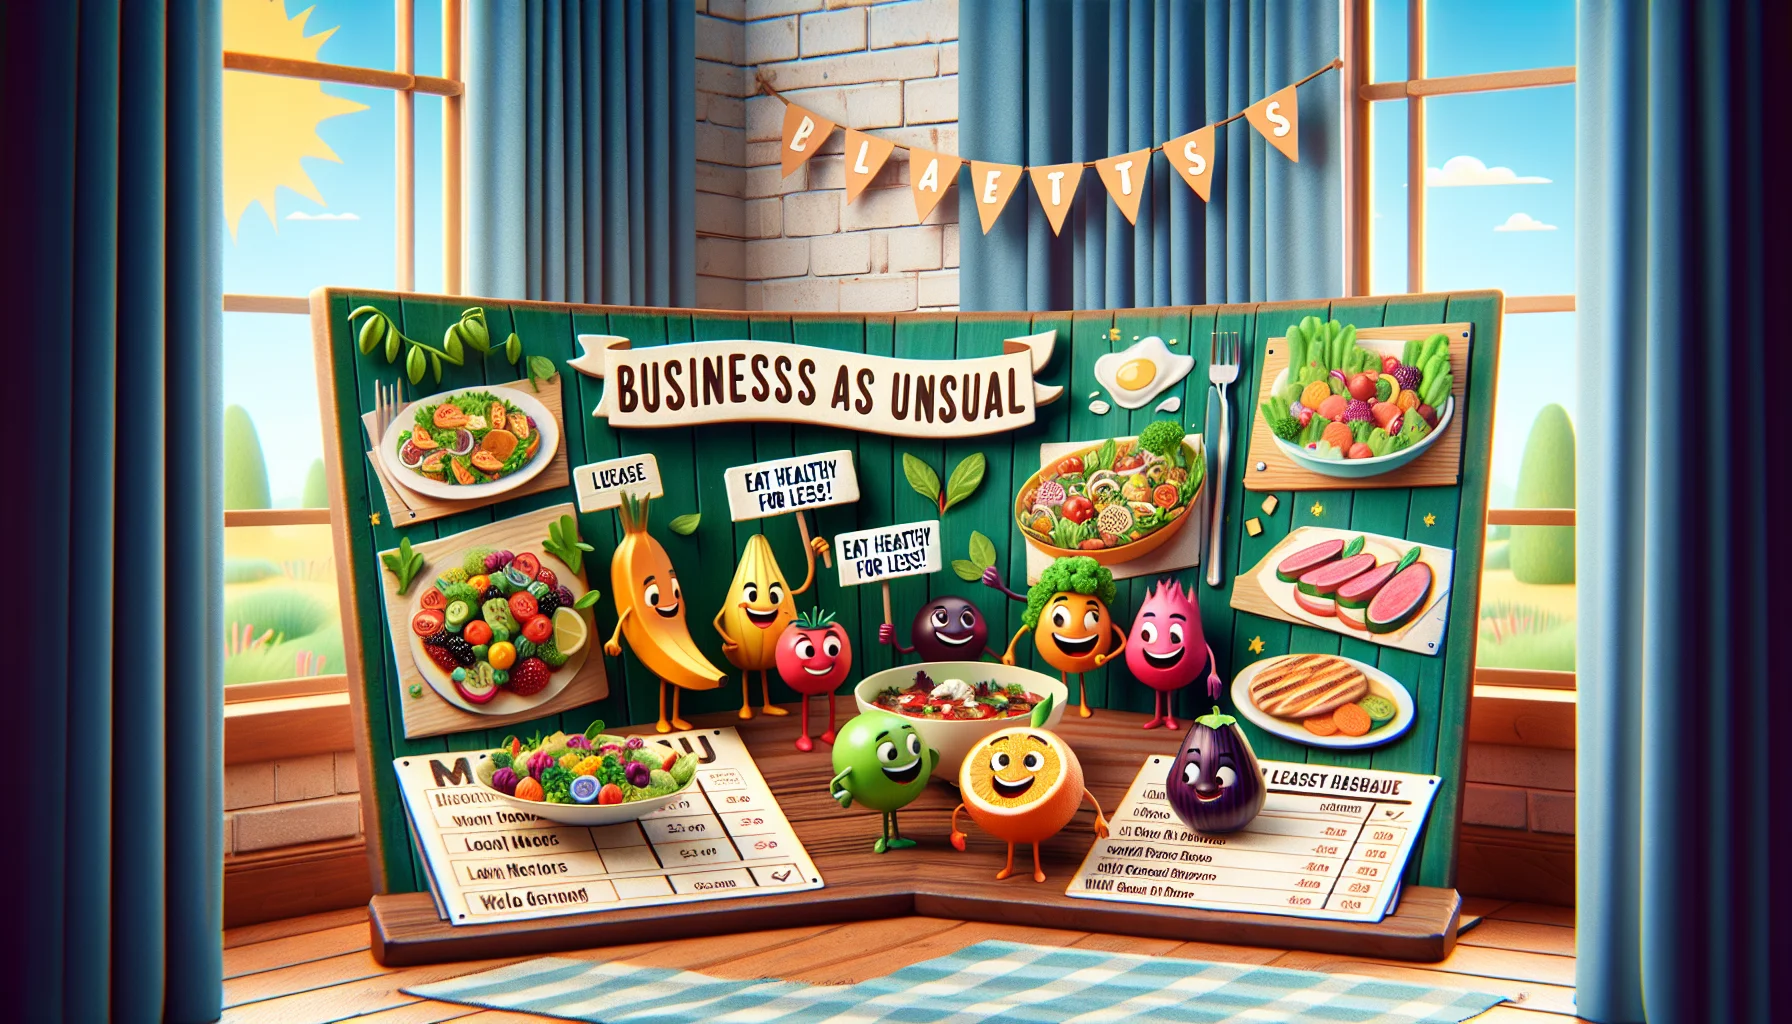 An amusing scene featuring a menu plan situated on a wooden cutting board, titled 'Business as Usual,' filled with illustrations of attractive, low-cost, and healthy meal options. The menu displays dishes like vibrant salads, colorful fruit bowls, grilled lean meats, and whole grain options. Smiling fruit and vegetable characters stand around the menu, acting as cheerleaders, showcasing banners that read 'Eat Healthy for Less!' Outside the windows, a sunny day bathes the room with warm light. The scene is designed to be charming and enticing, inspiring to prioritize health without straining the wallet.